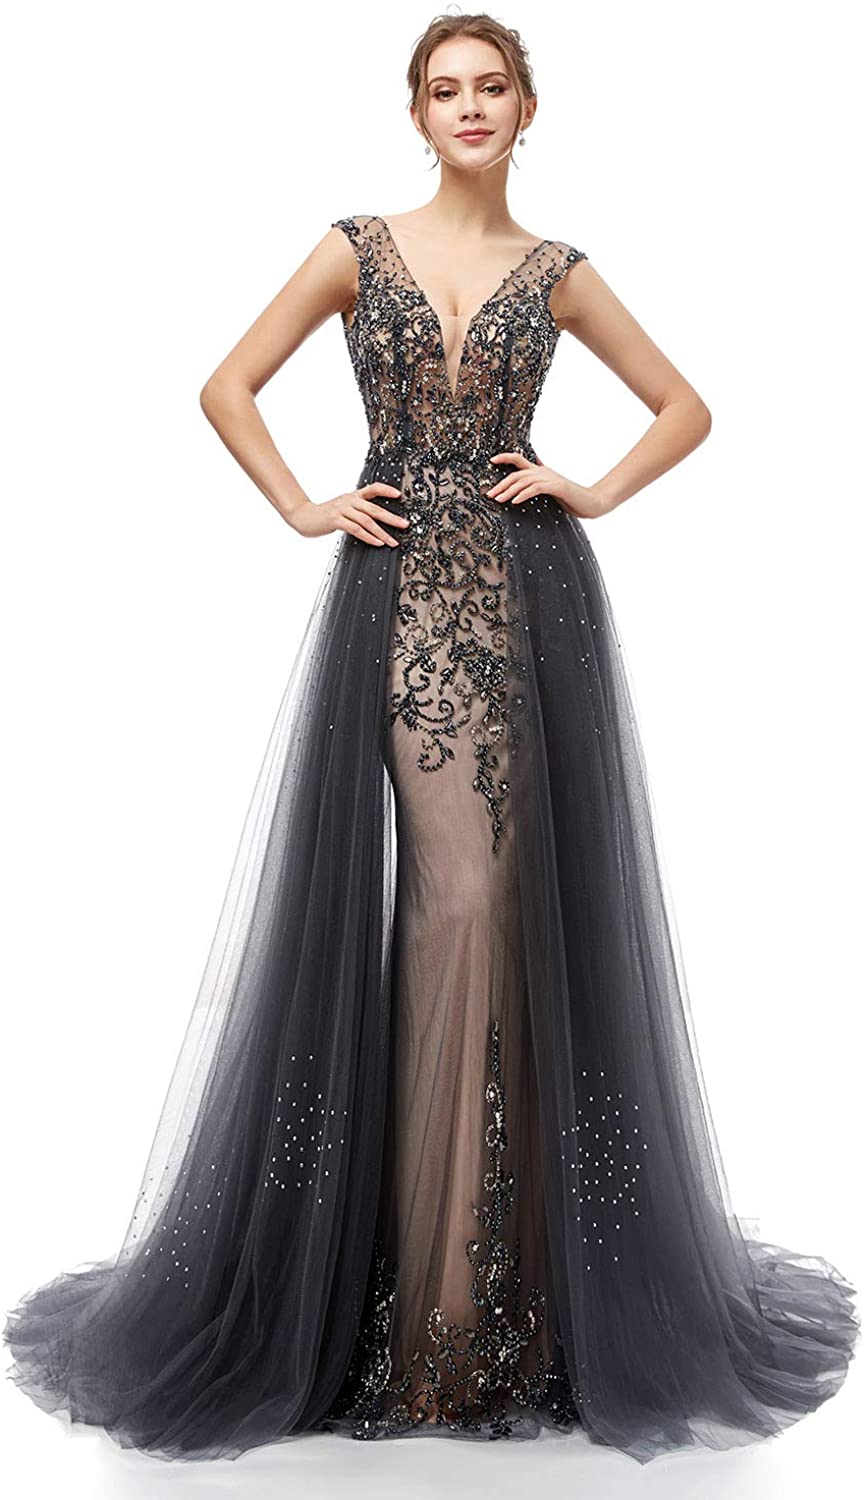 Sarahbridal Women's Crystal Beaded Prom Dress Long Evening Gowns | eBay